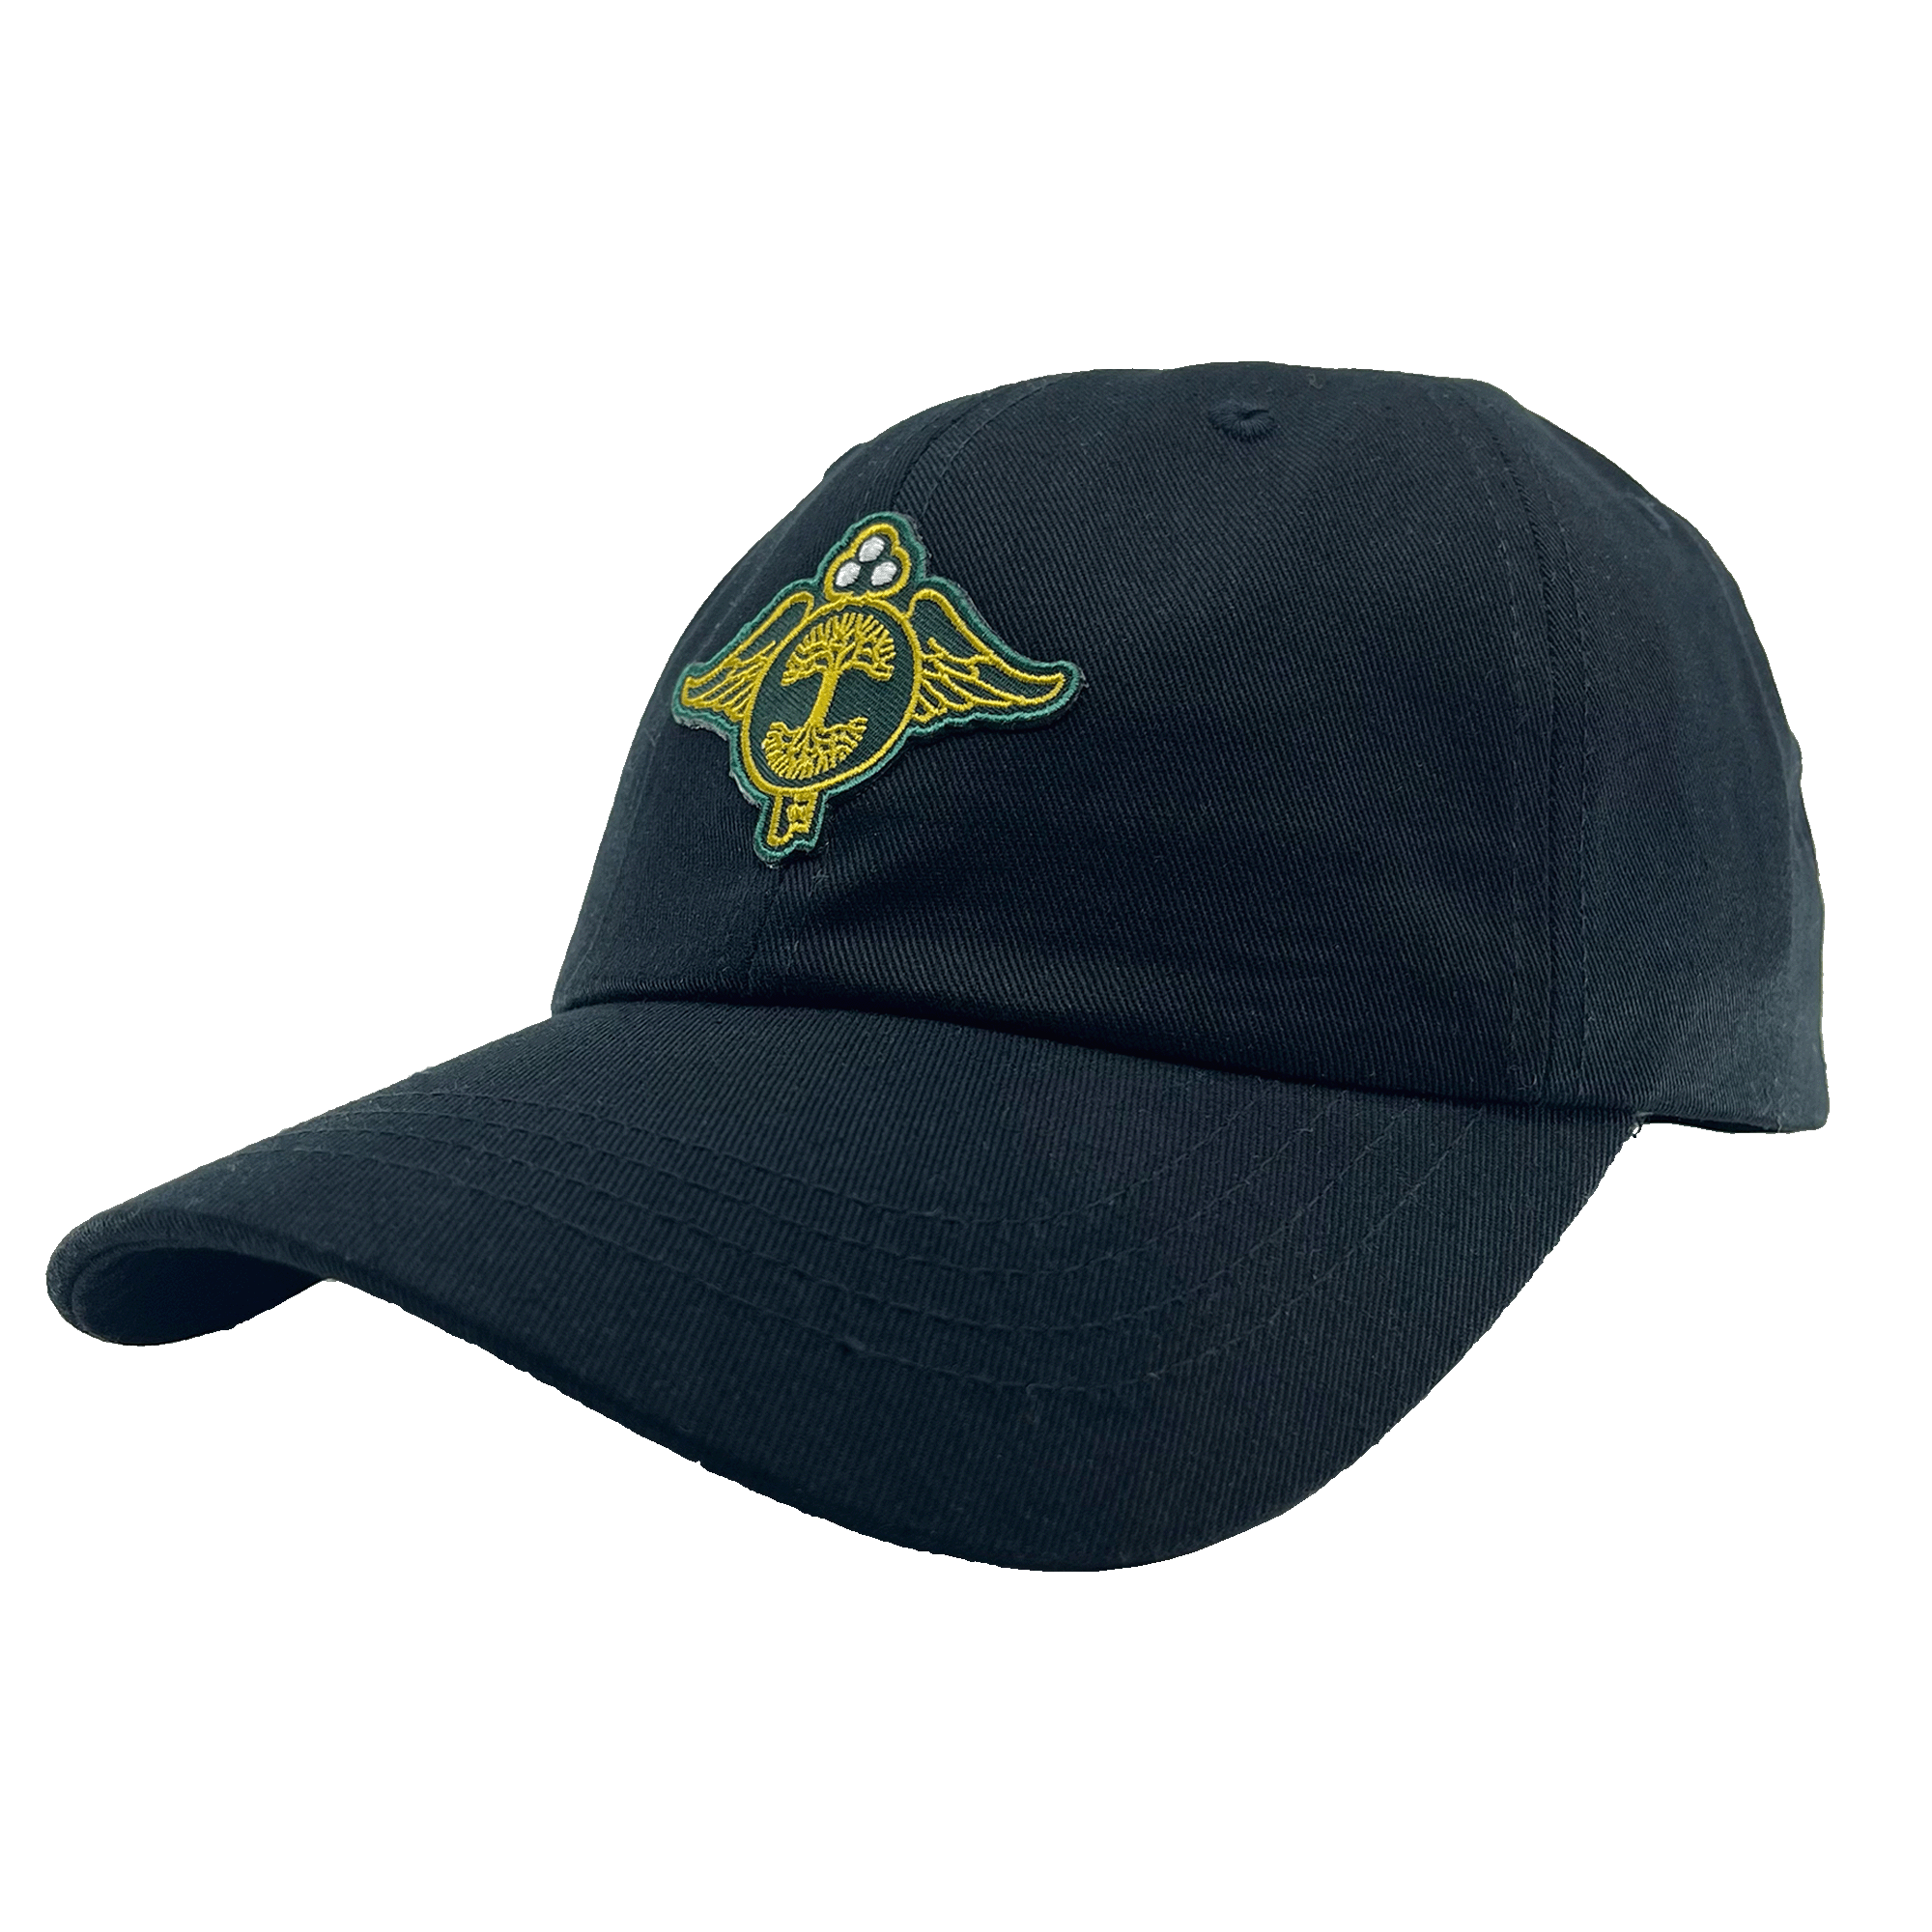 Side view of black dad-style baseball cap with embroidered collaborative logos of Key System streetcars and Oaklandish on the crown.